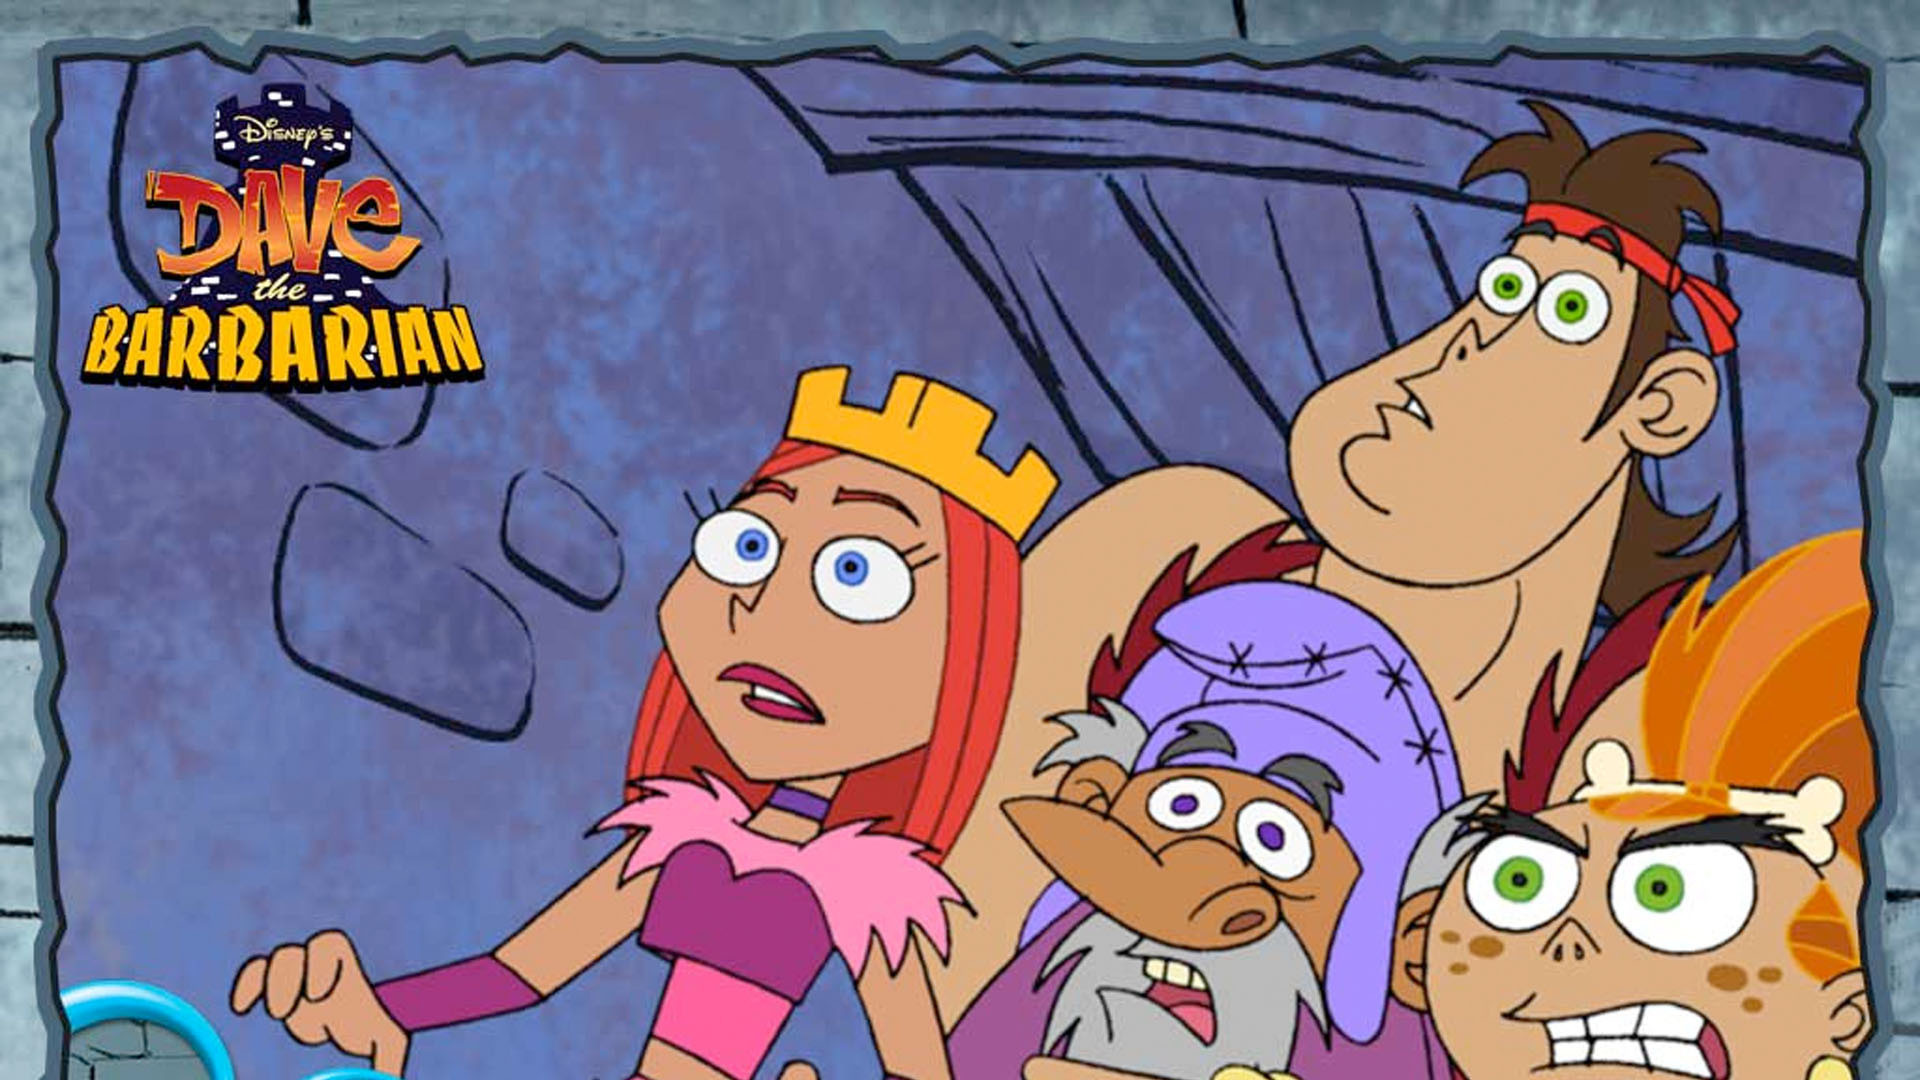 Show Dave the Barbarian